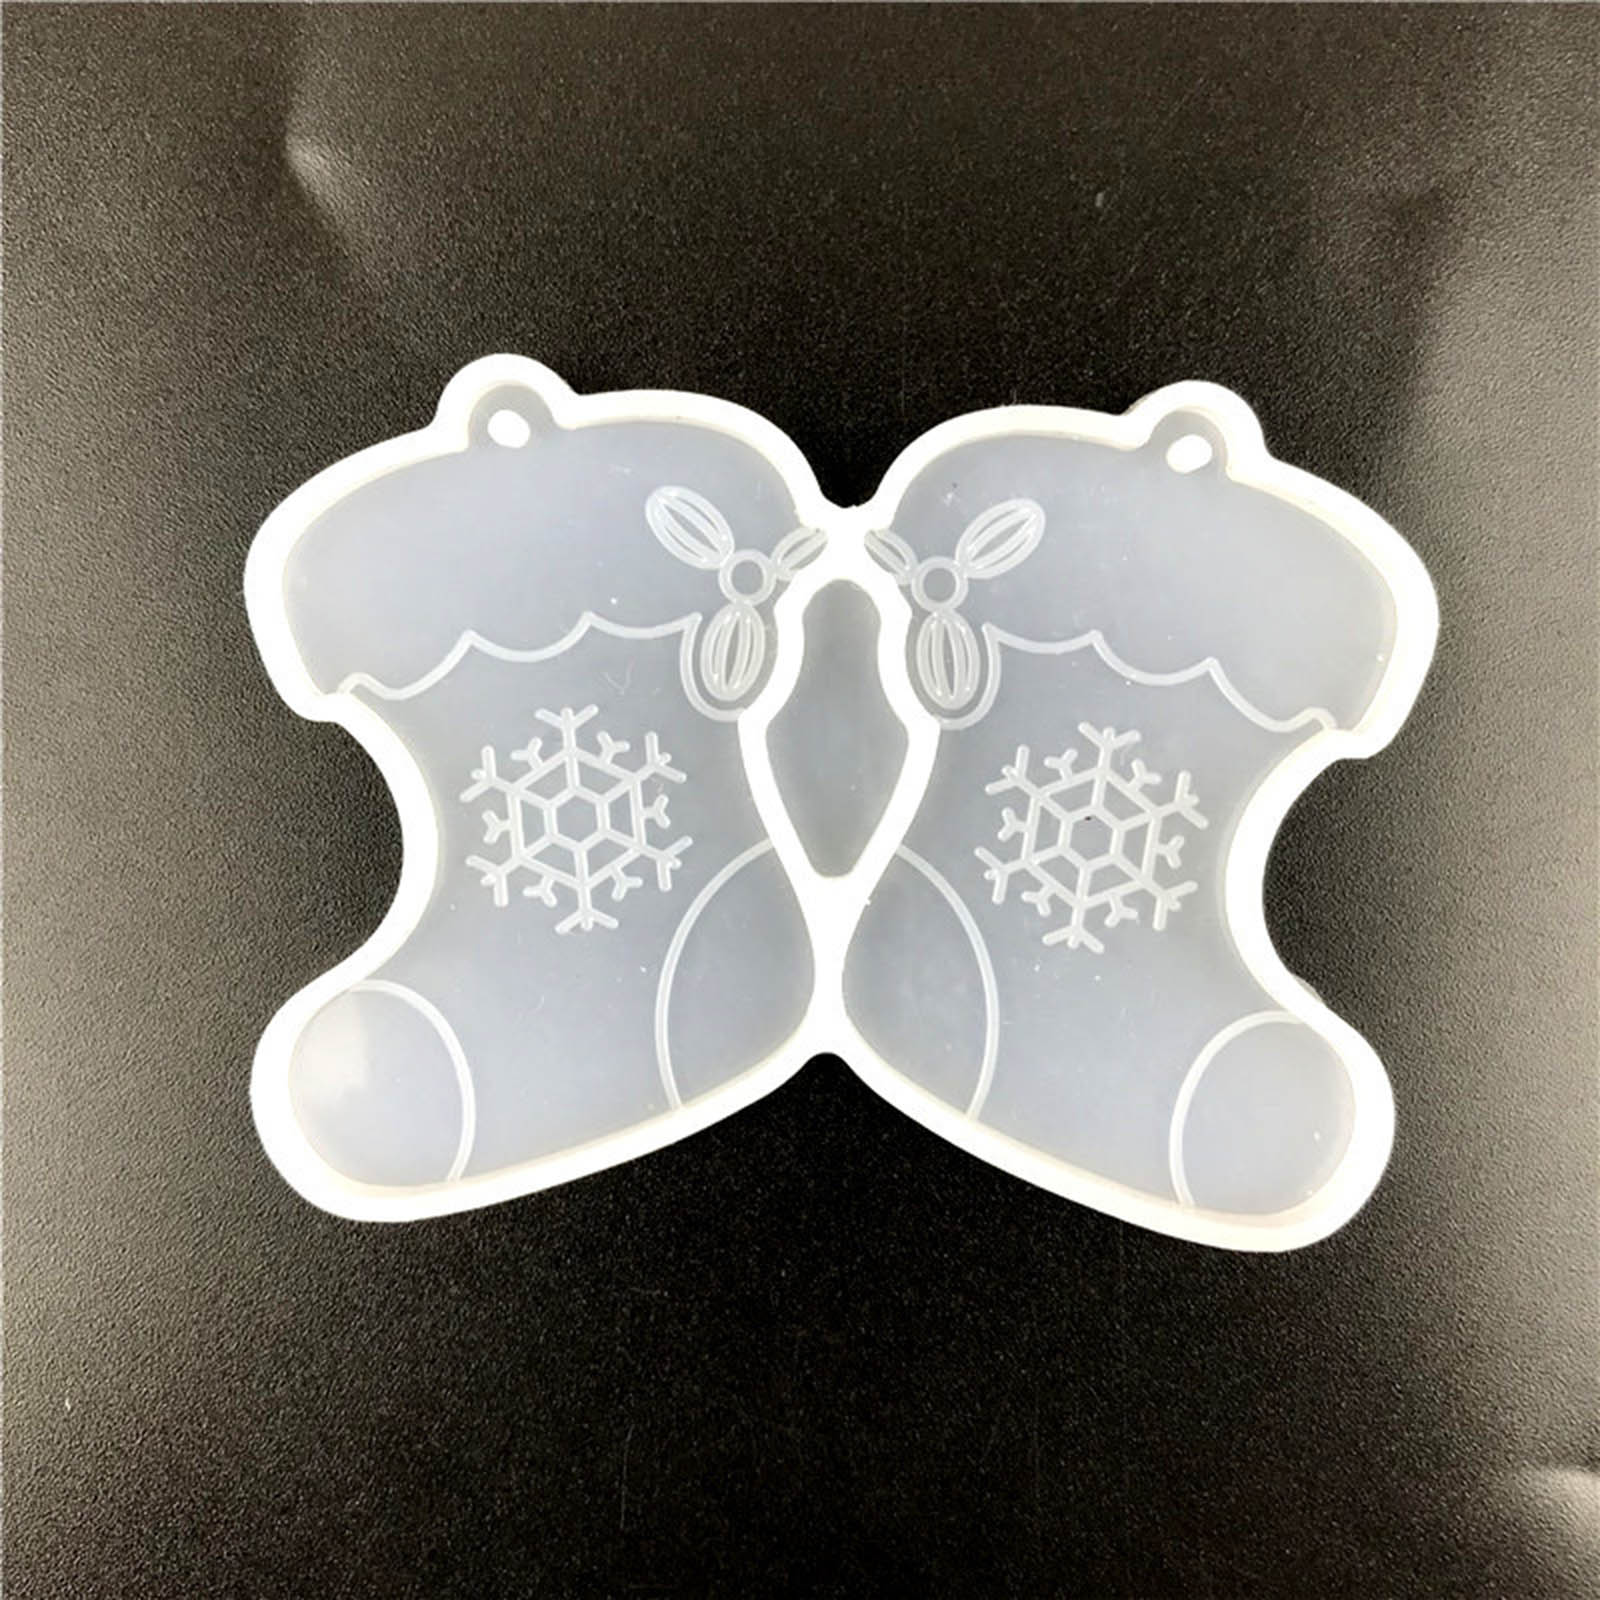 Picture of Silicone Resin Mold For Jewelry Making Earring Pendant Christmas Santa Boots White 7.3cm x 5.5cm, 1 Piece